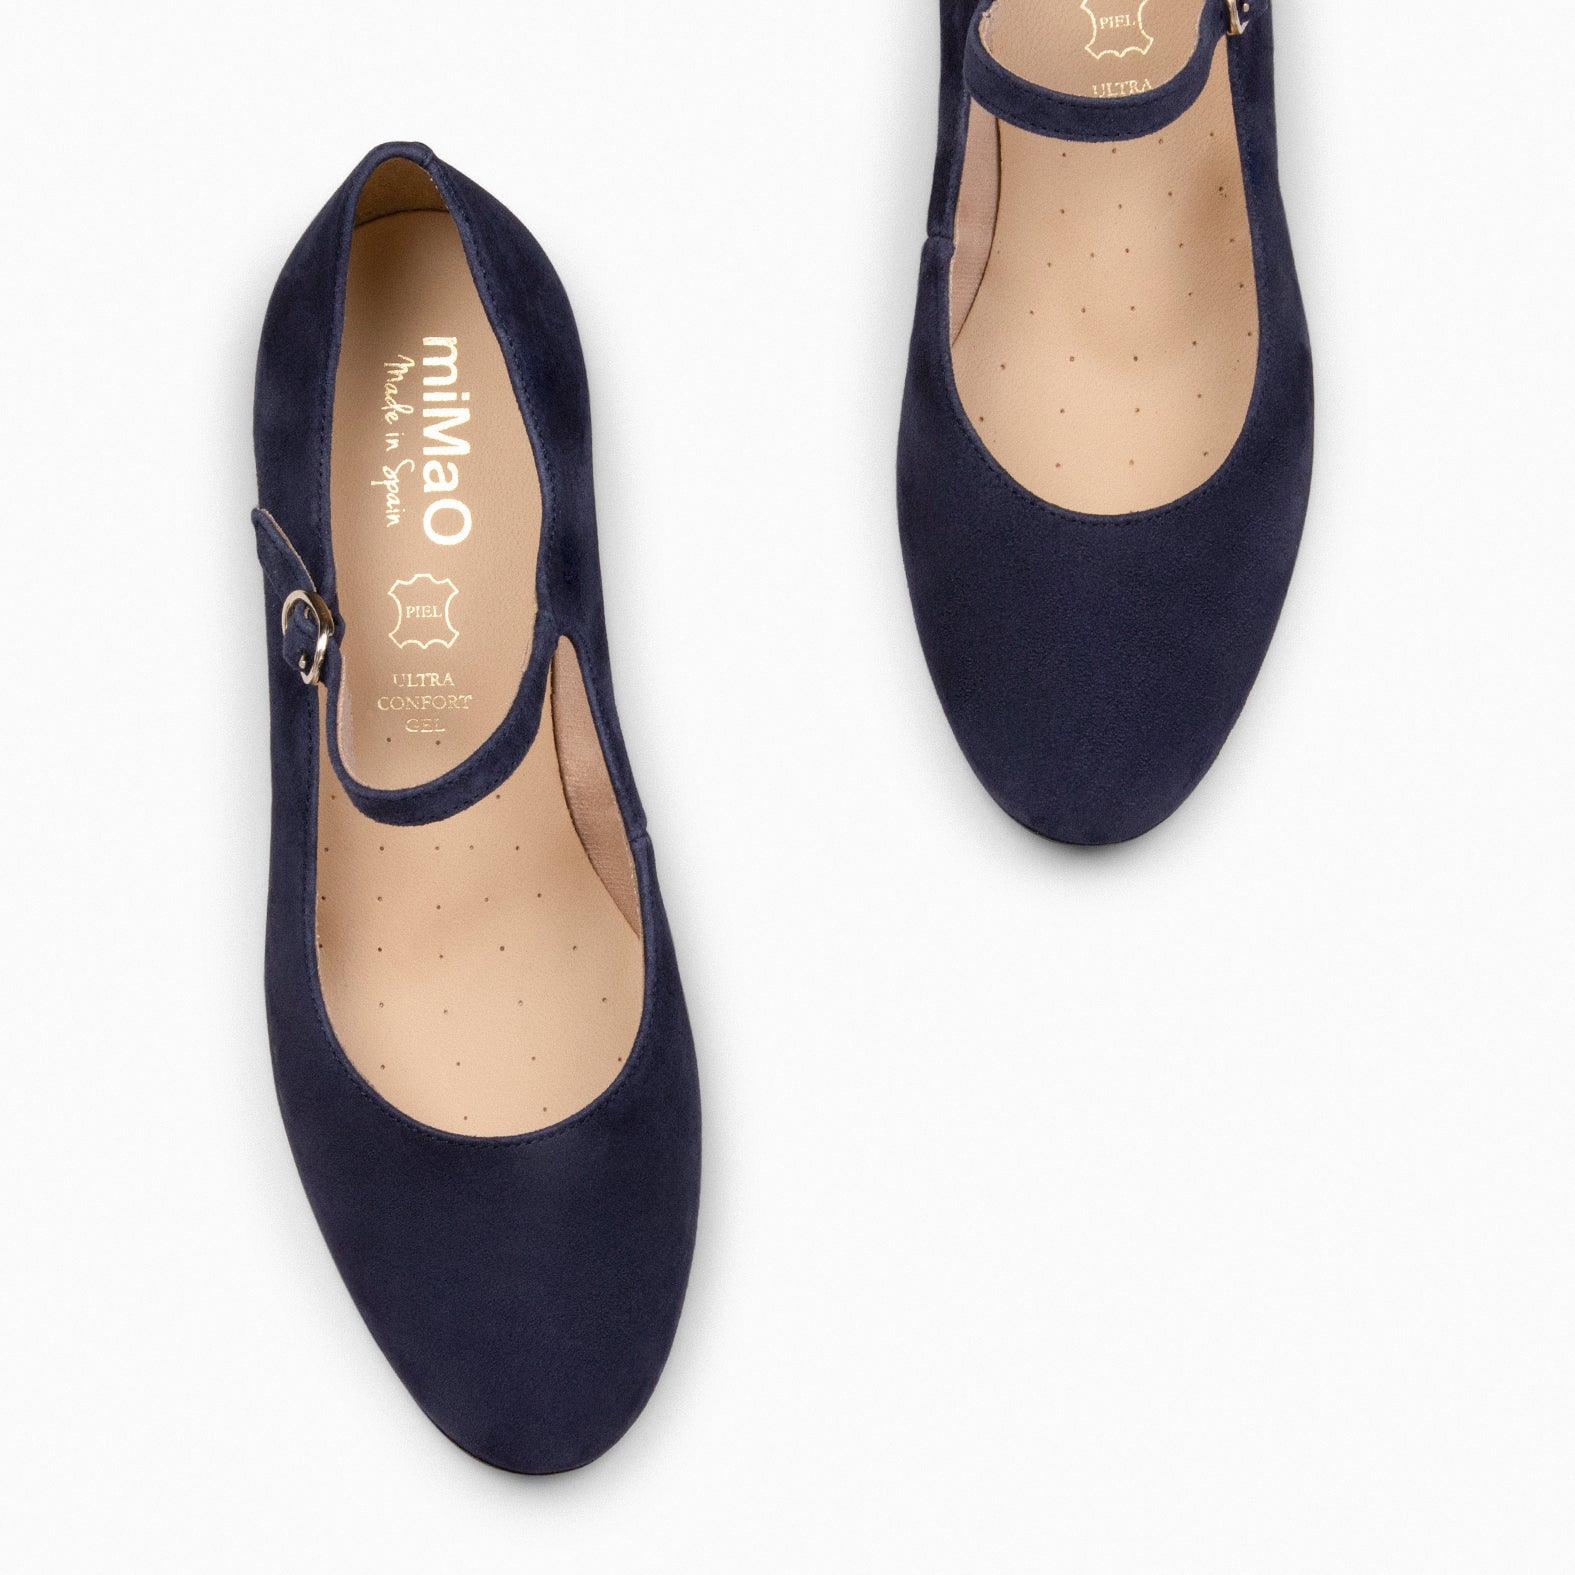 NORA – NAVY Mary-Janes with low heel 